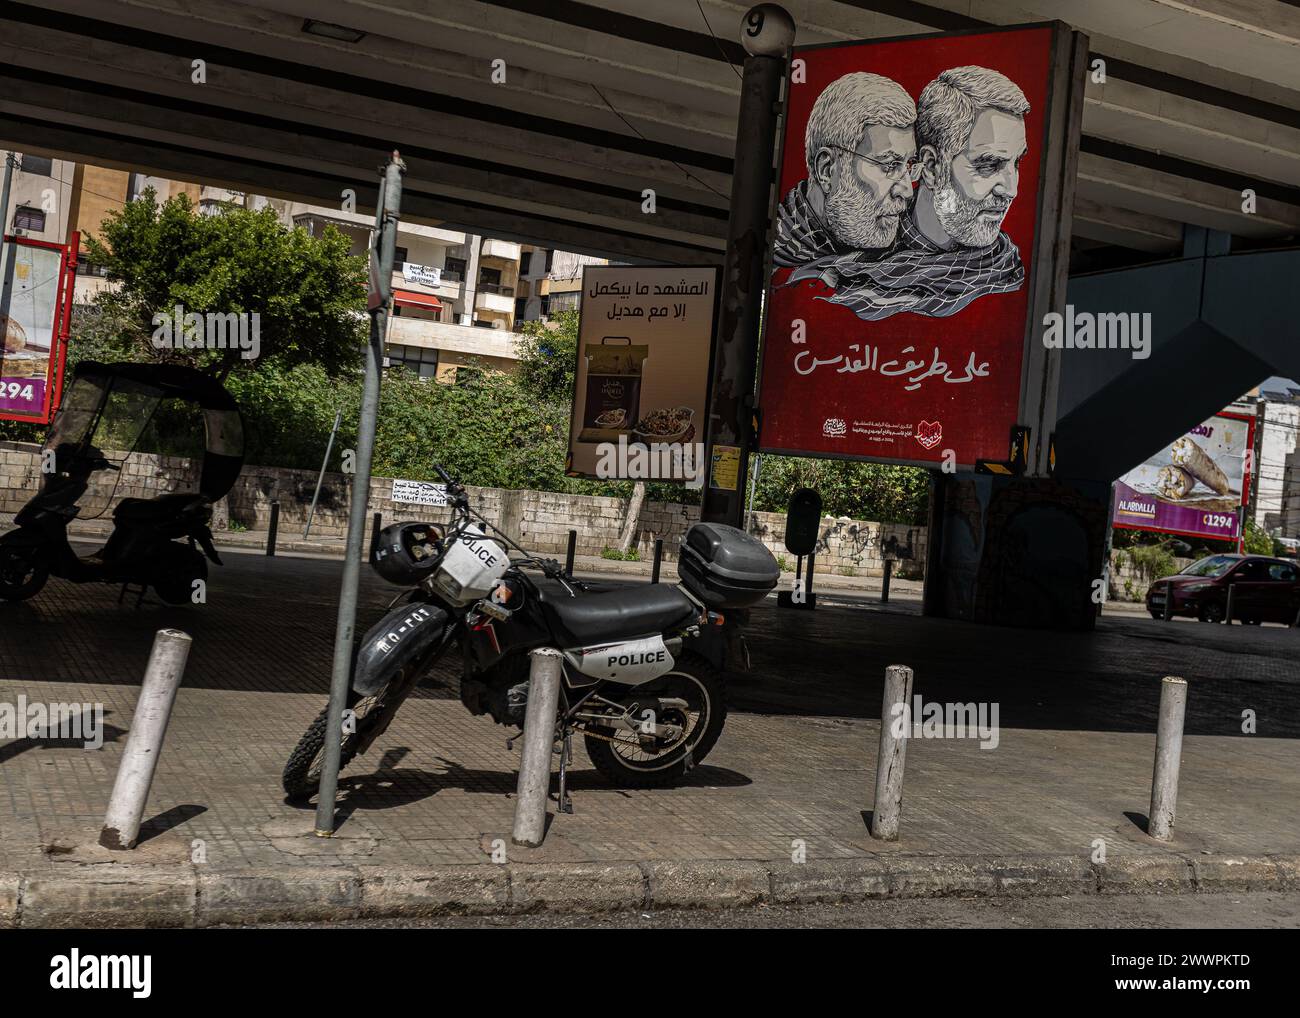 Beirut, Lebanon. 20th Mar, 2024. A portrait of slain Iranian General and Quds Force Commander Qasem Soleimani and Iraqi Popular Mobilization Forces (PMF) commander Abu Mahdi al-Muhandis in the Dahieh suburb of Beirut, Lebanon, on Mar. 20, 2024. Soleimani and Muhandis were assassinated by a US drone strike on Jan. 3, 2020. Dahieh is a Hezbollah-controlled neighborhood in Beirut. Photo by Collin Mayfield/Sipa USA Credit: Sipa USA/Alamy Live News Stock Photo